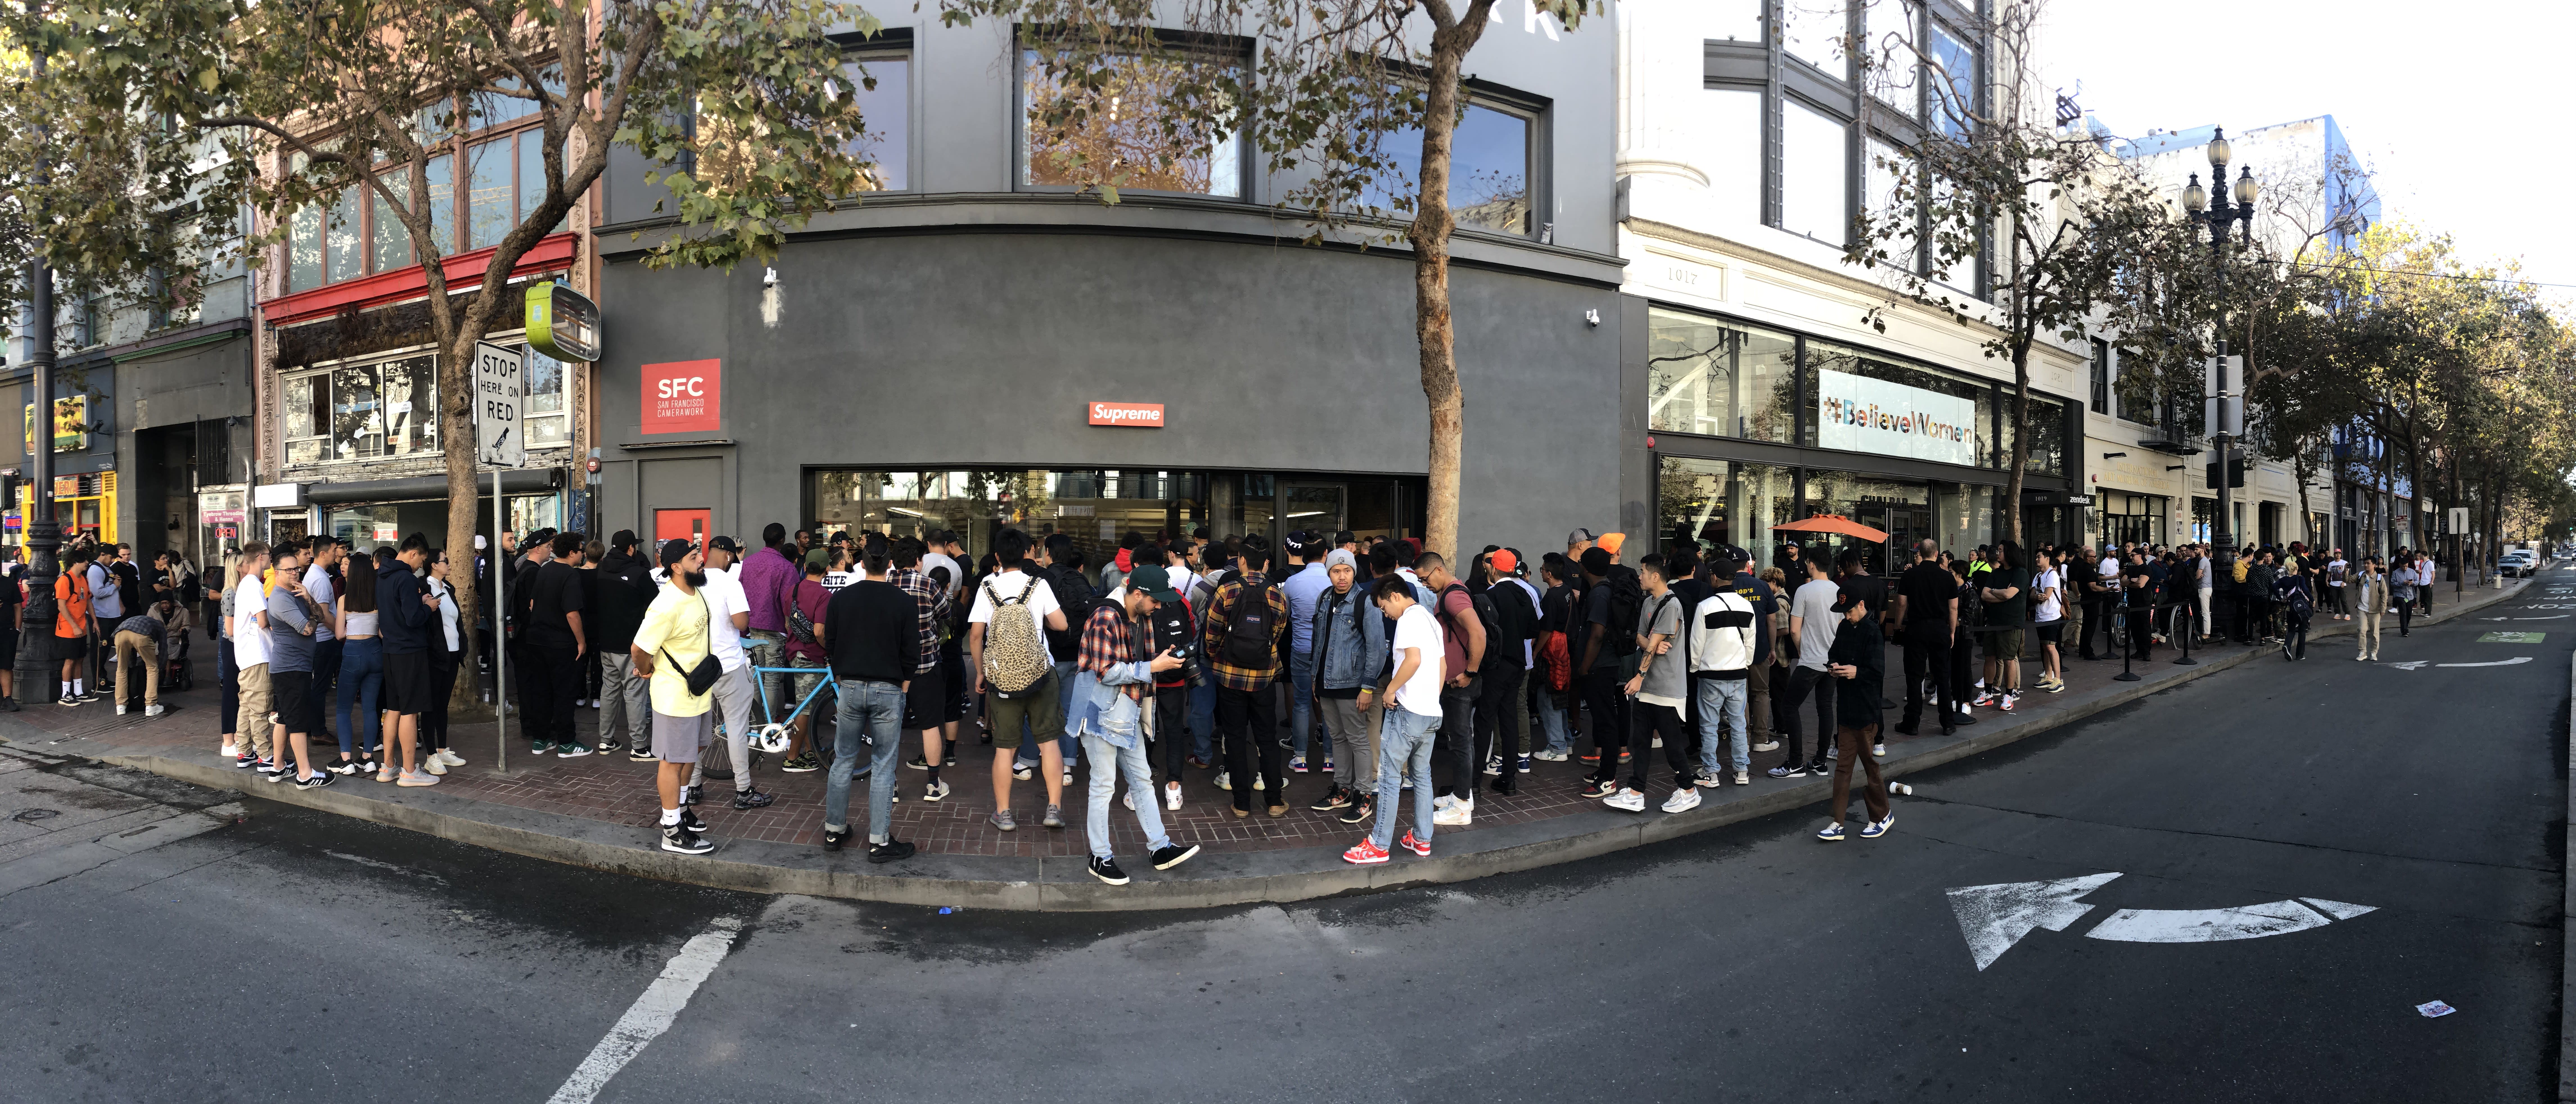 What I learned from San Francisco's new Supreme store